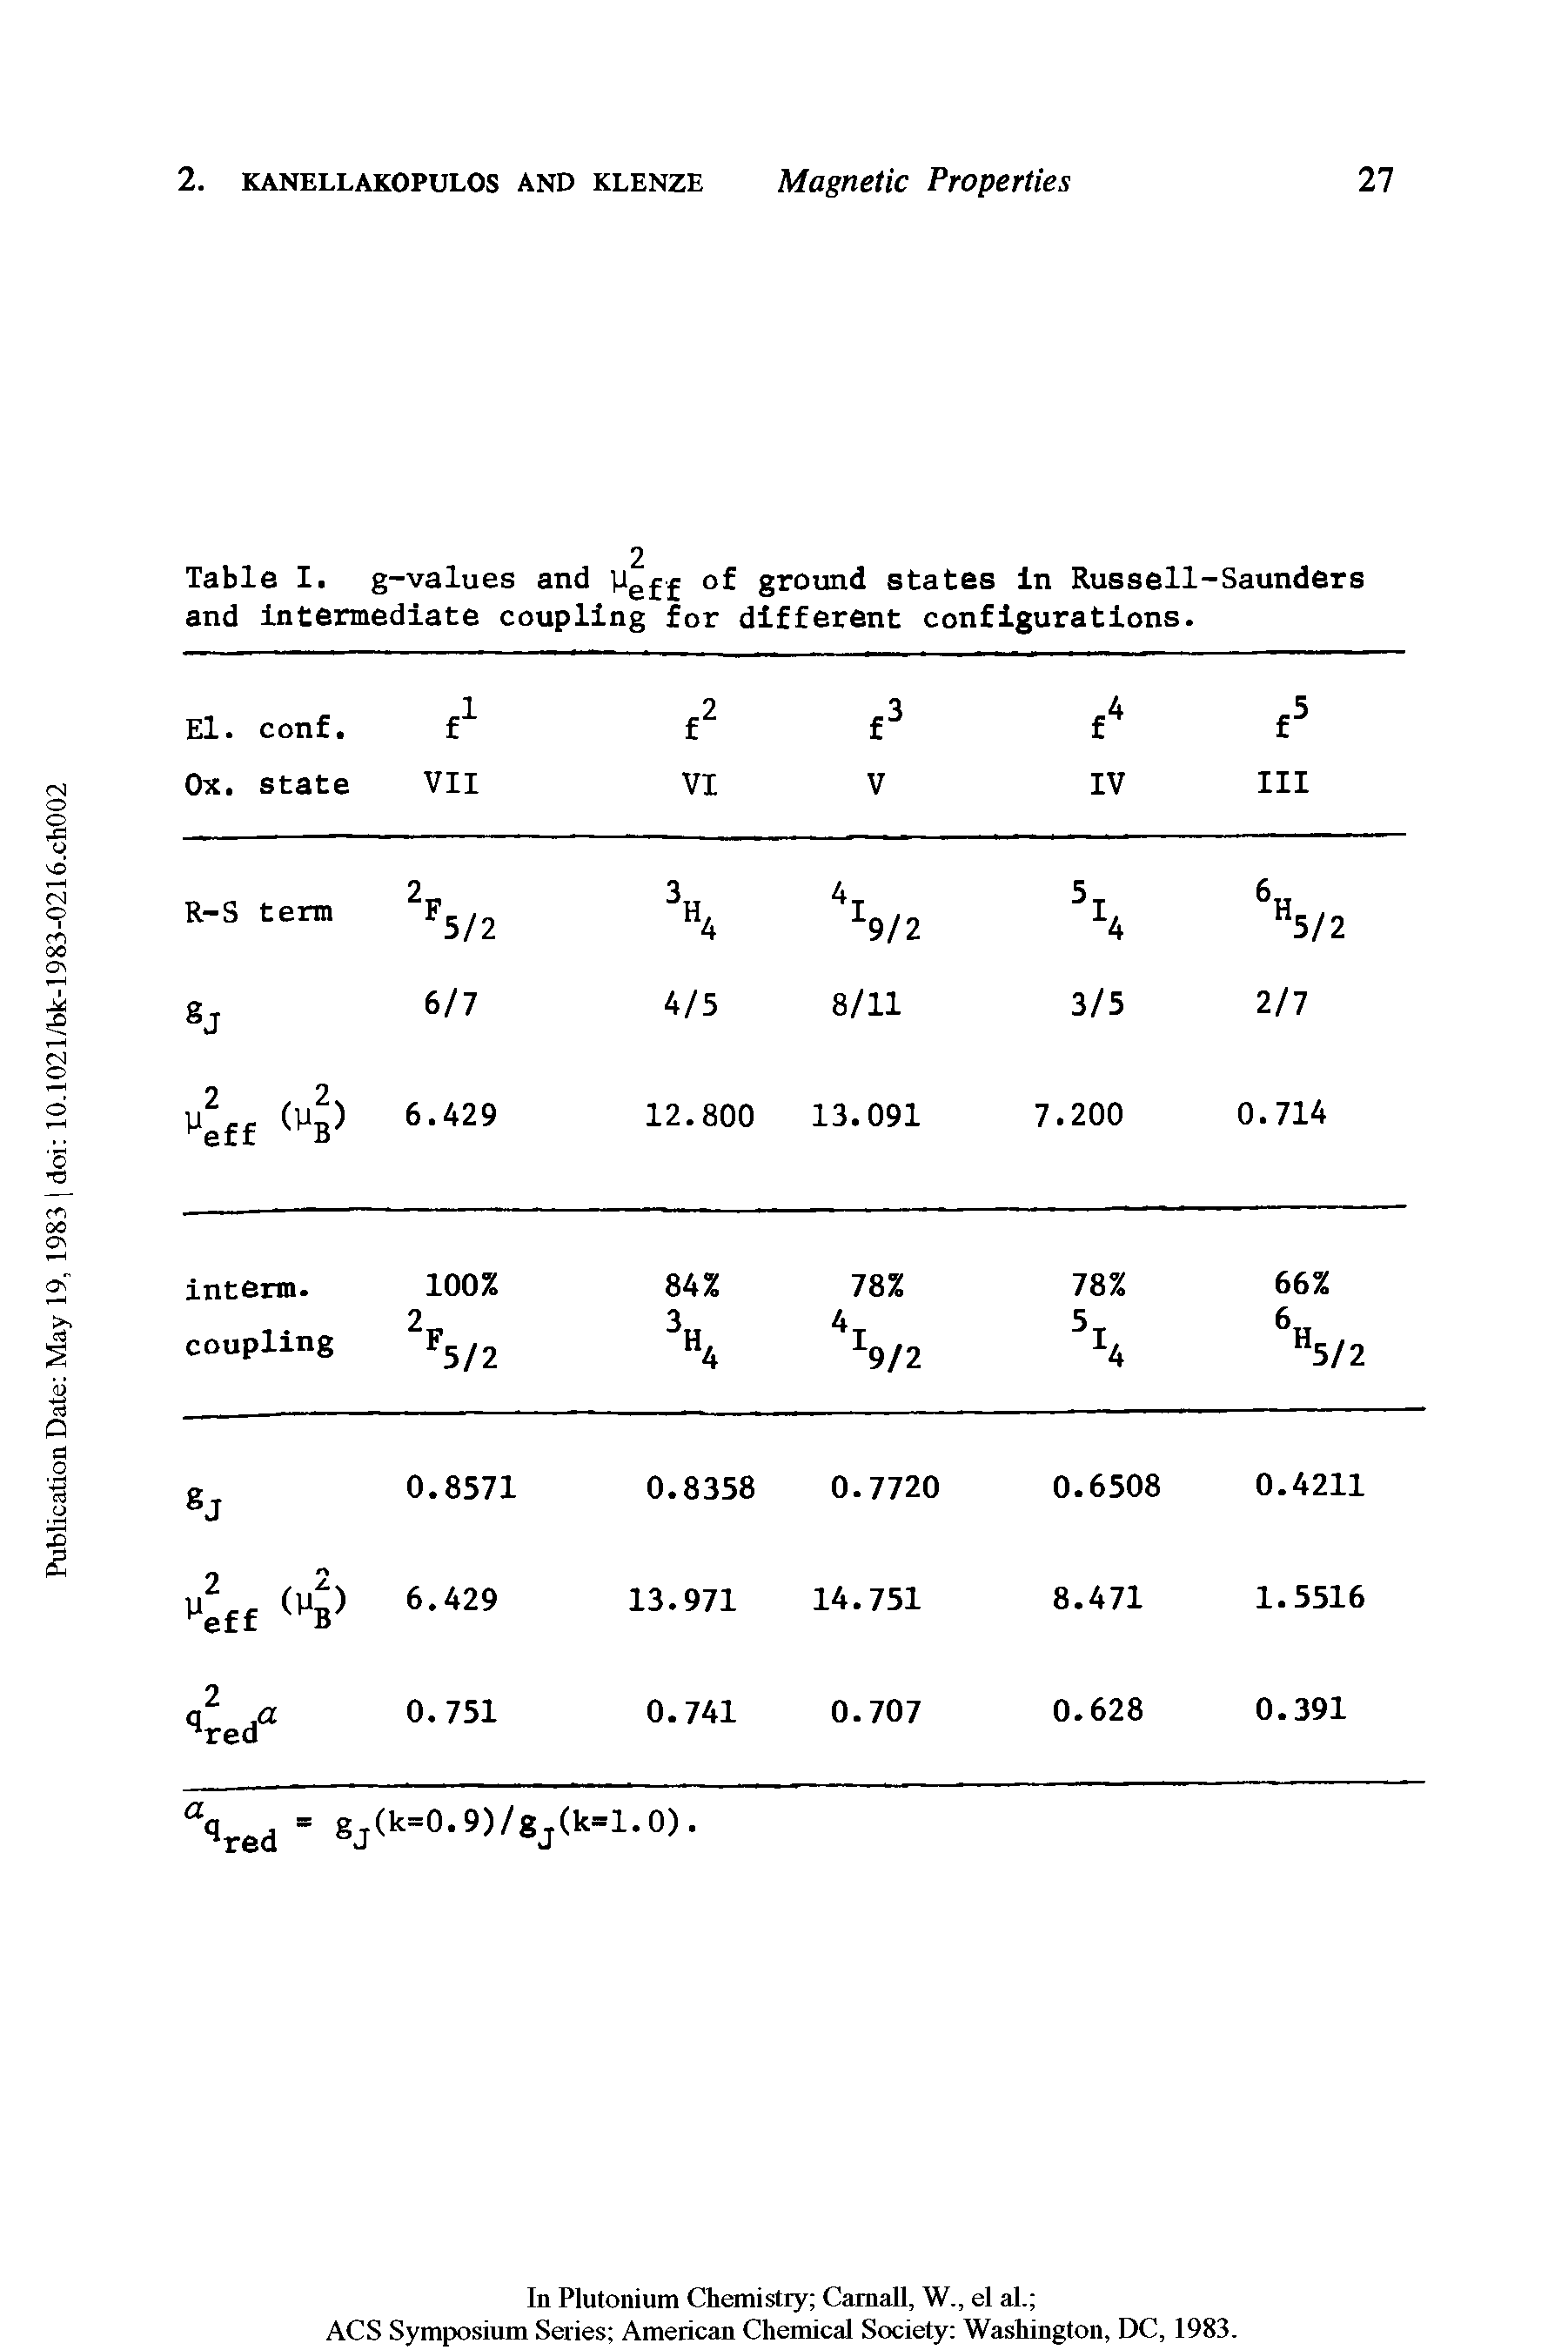 Table I. g-values and Ueff of ground states In Russell-Saunders and intermediate coupling for different configurations.